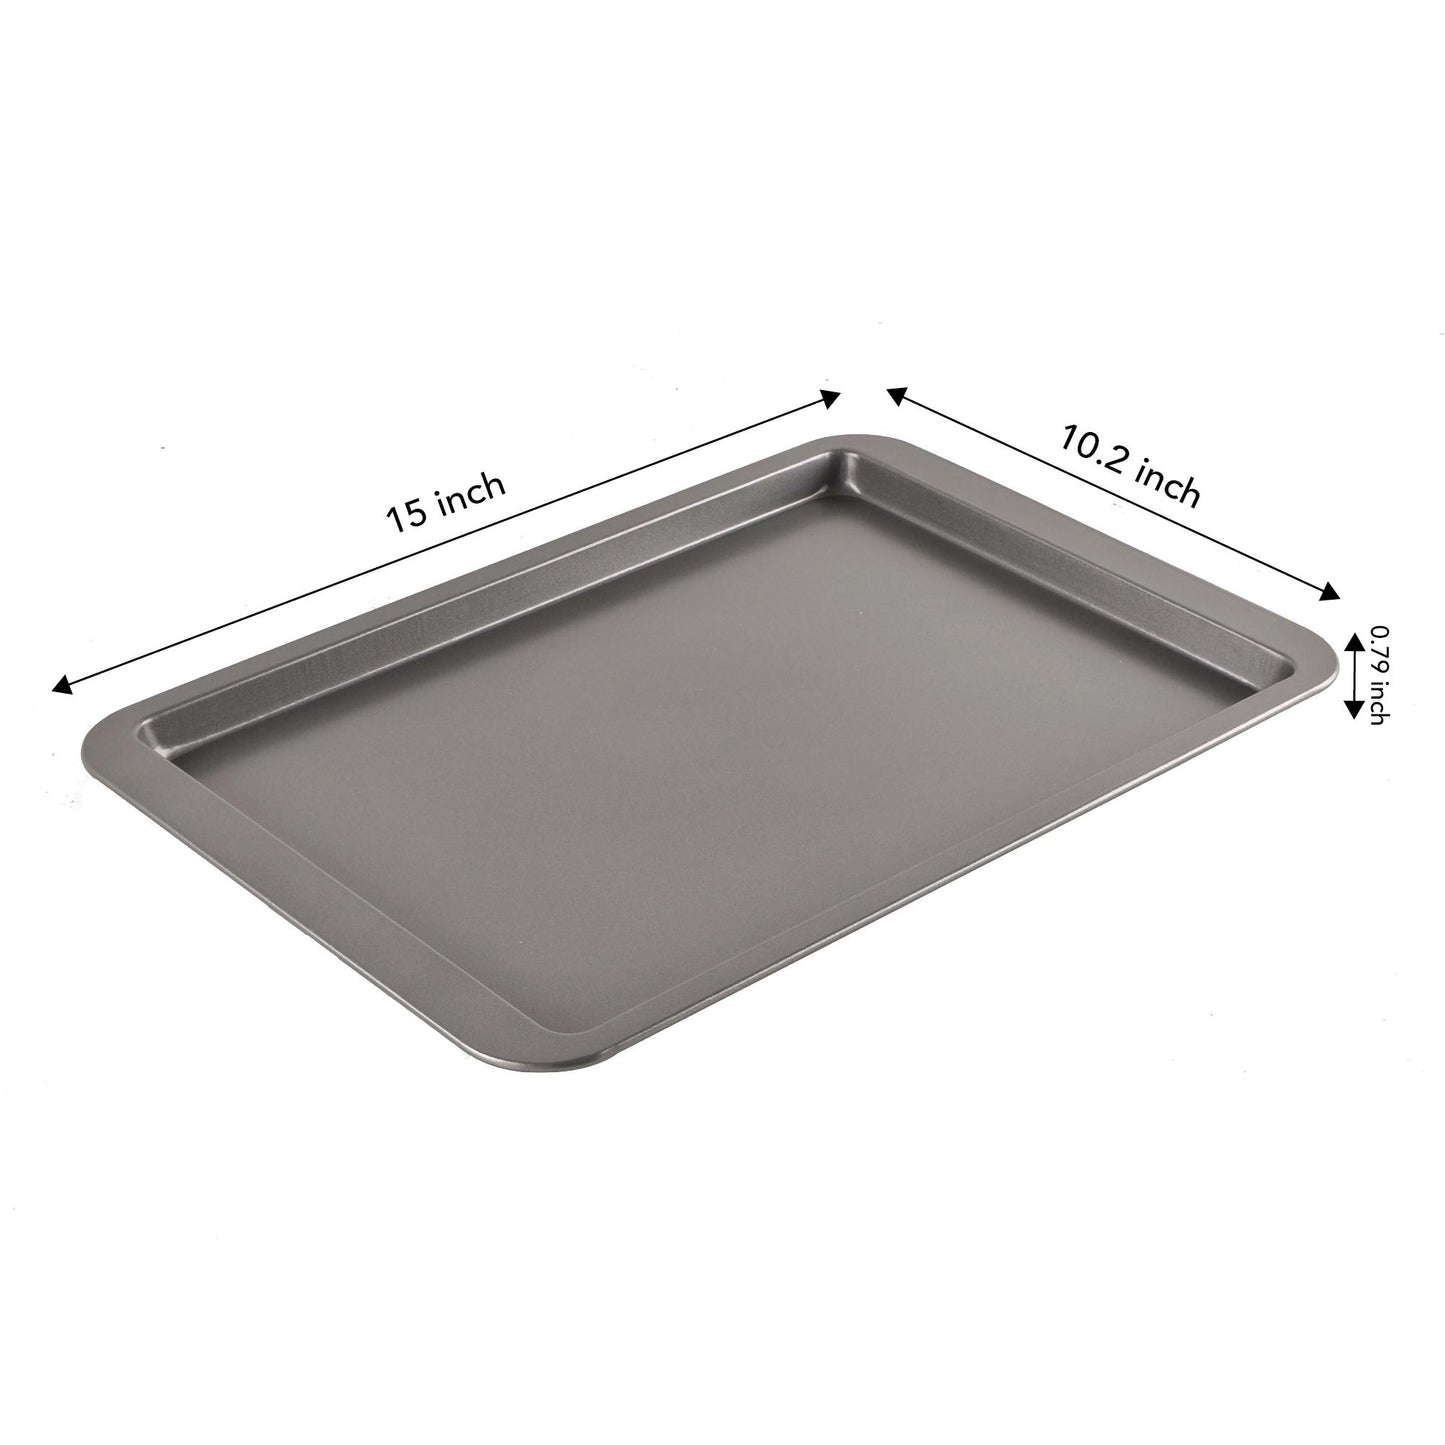 15 X 10 INCH COOKIE SHEET